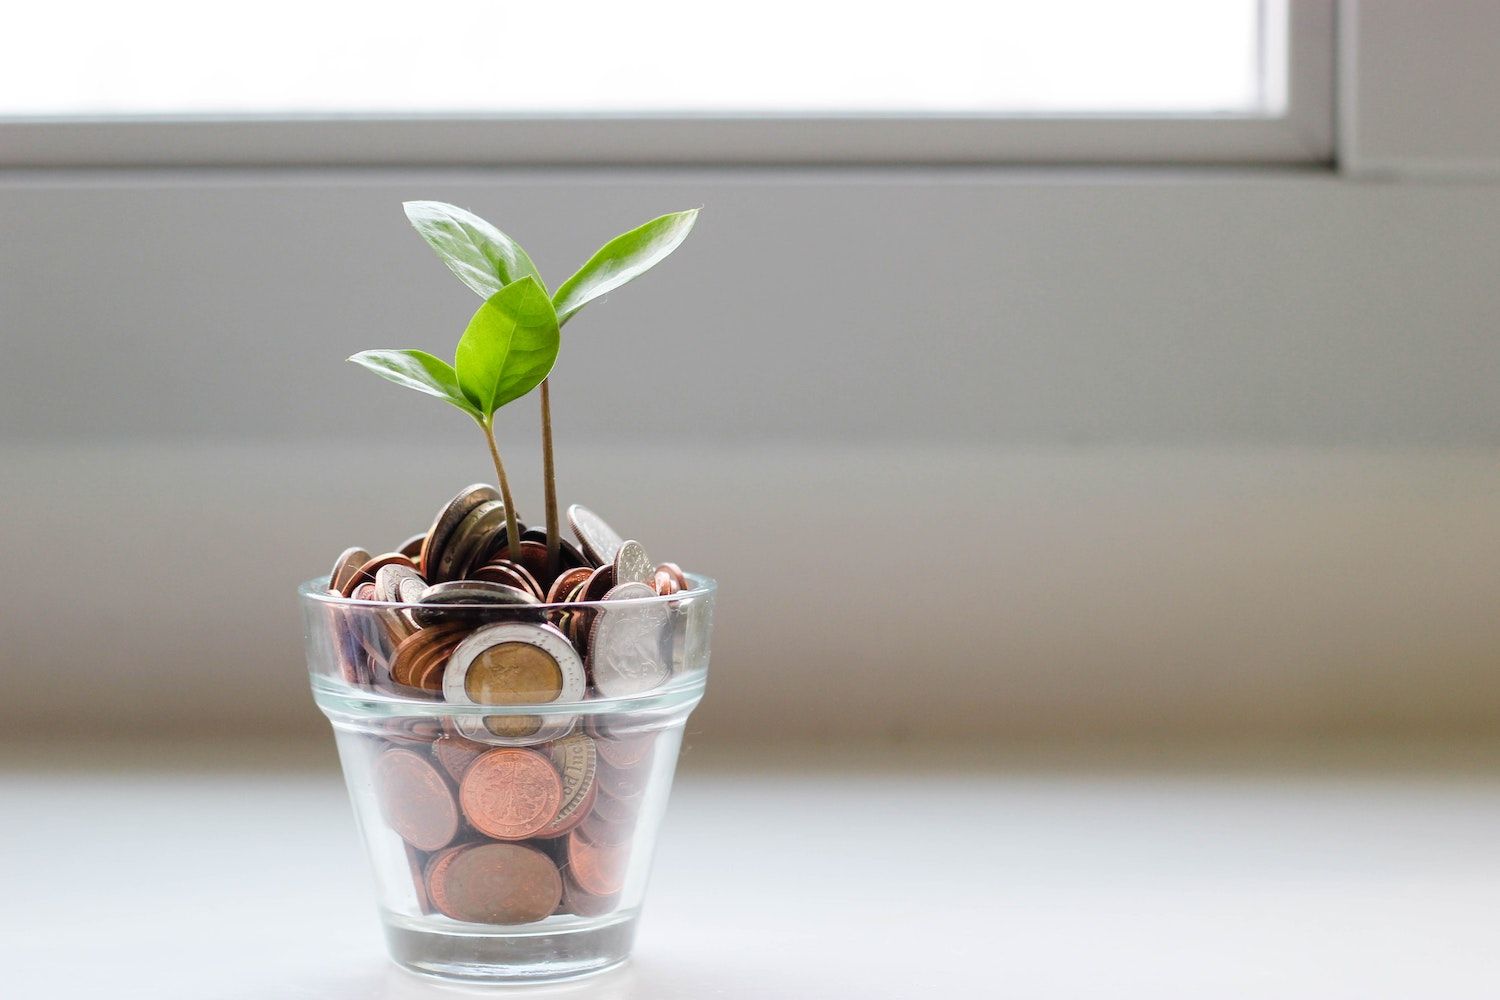 Plant growing from a pot of money